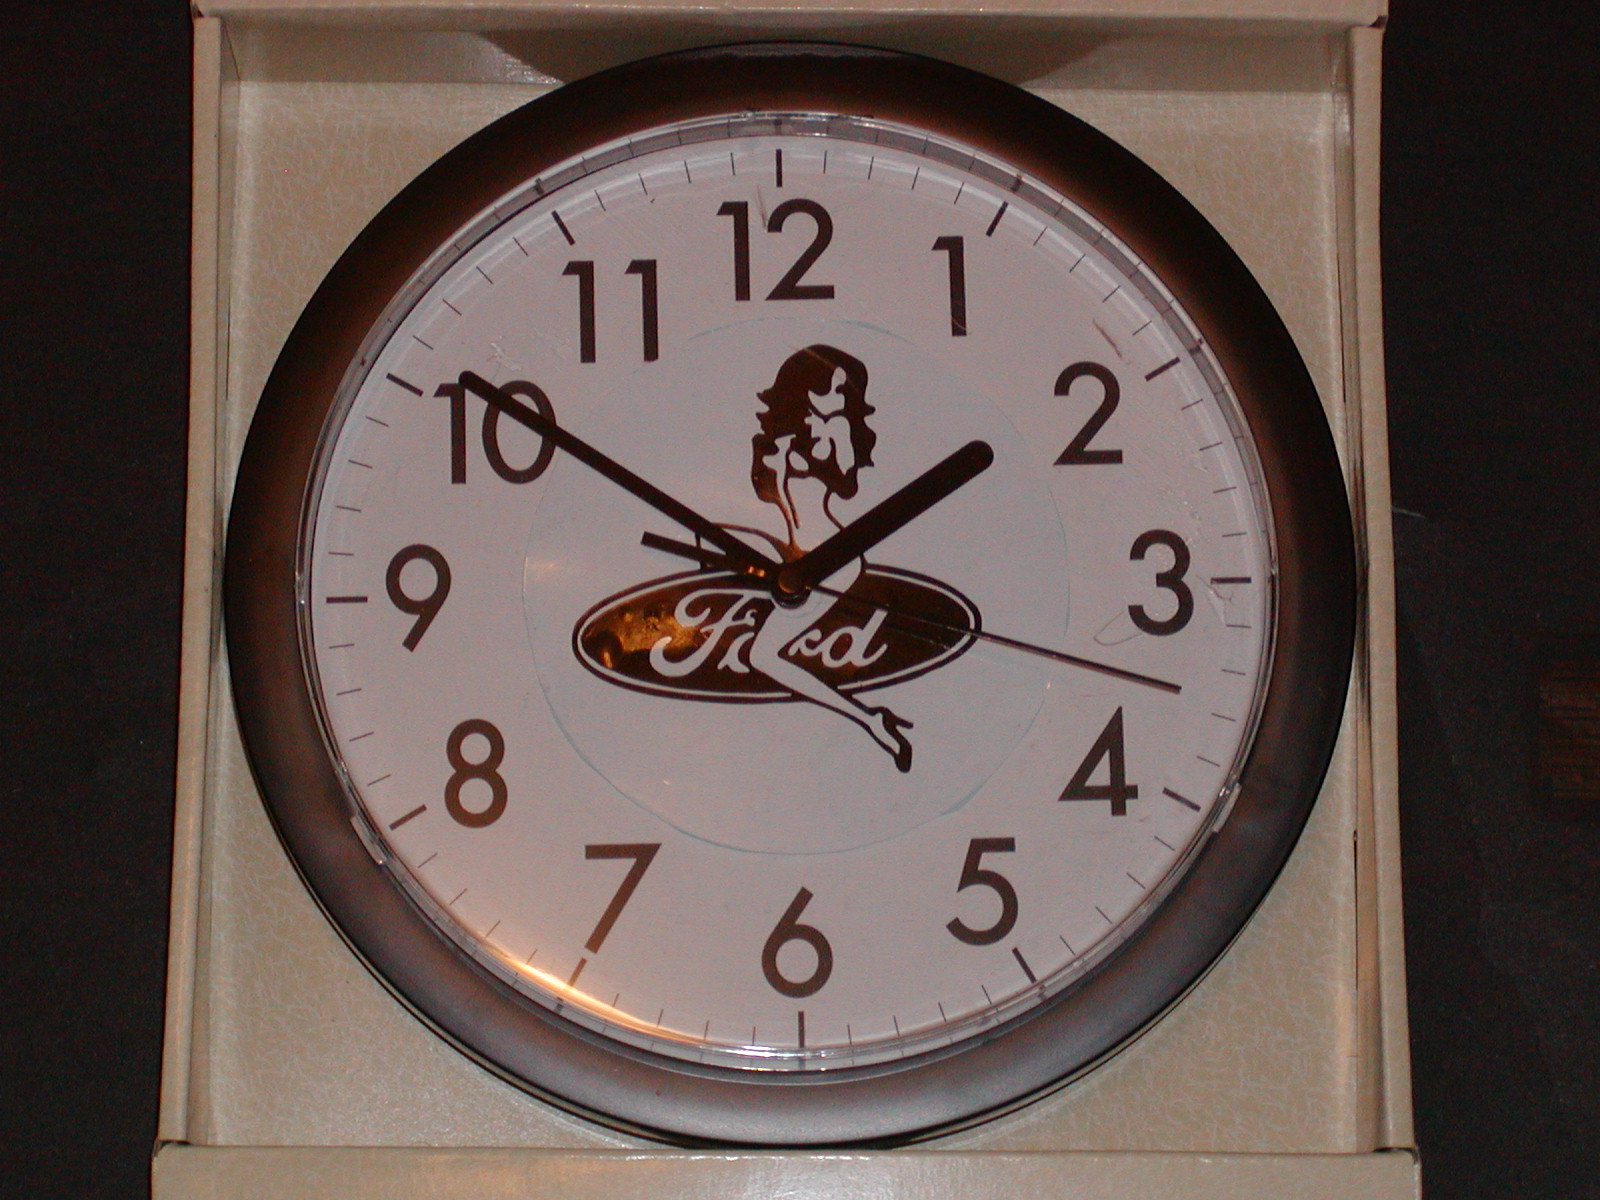 11.5" Round CUSTOM CLOCKS! W/ Your choice of Girl Rides Logos  You pick the logo color!